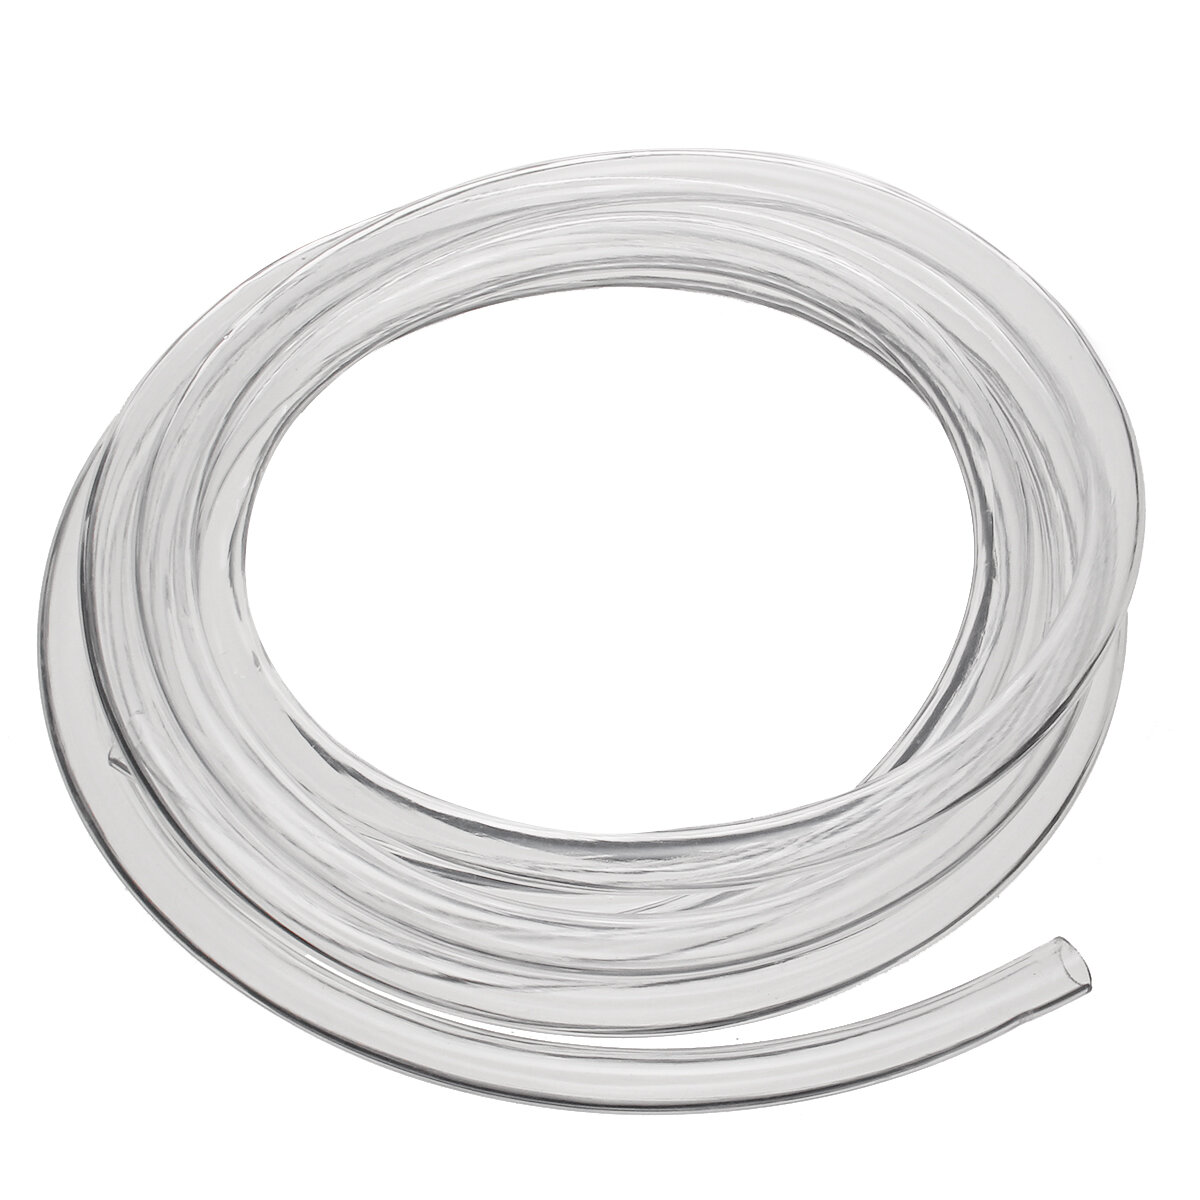 Aquarium 3M Filter Canister Water Pipe Clear Tubing 16/22mm for 17mm Pipe